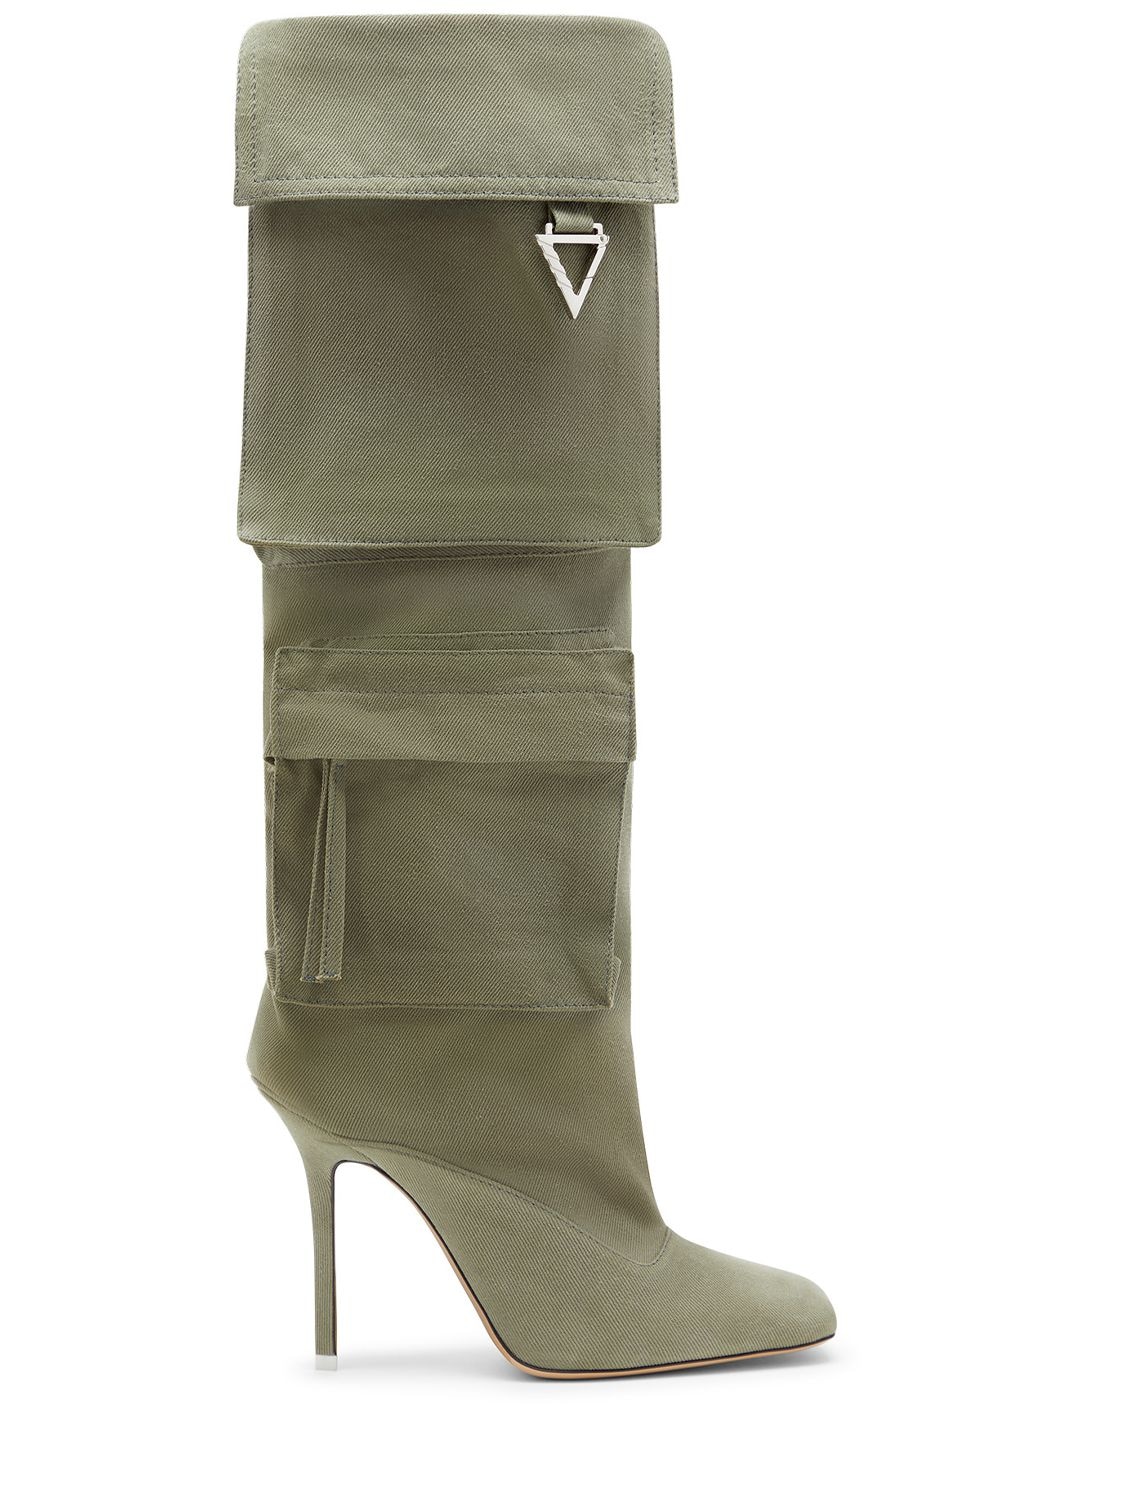 Attico 105mm Sienna Canvas Tall Boots In Military Green